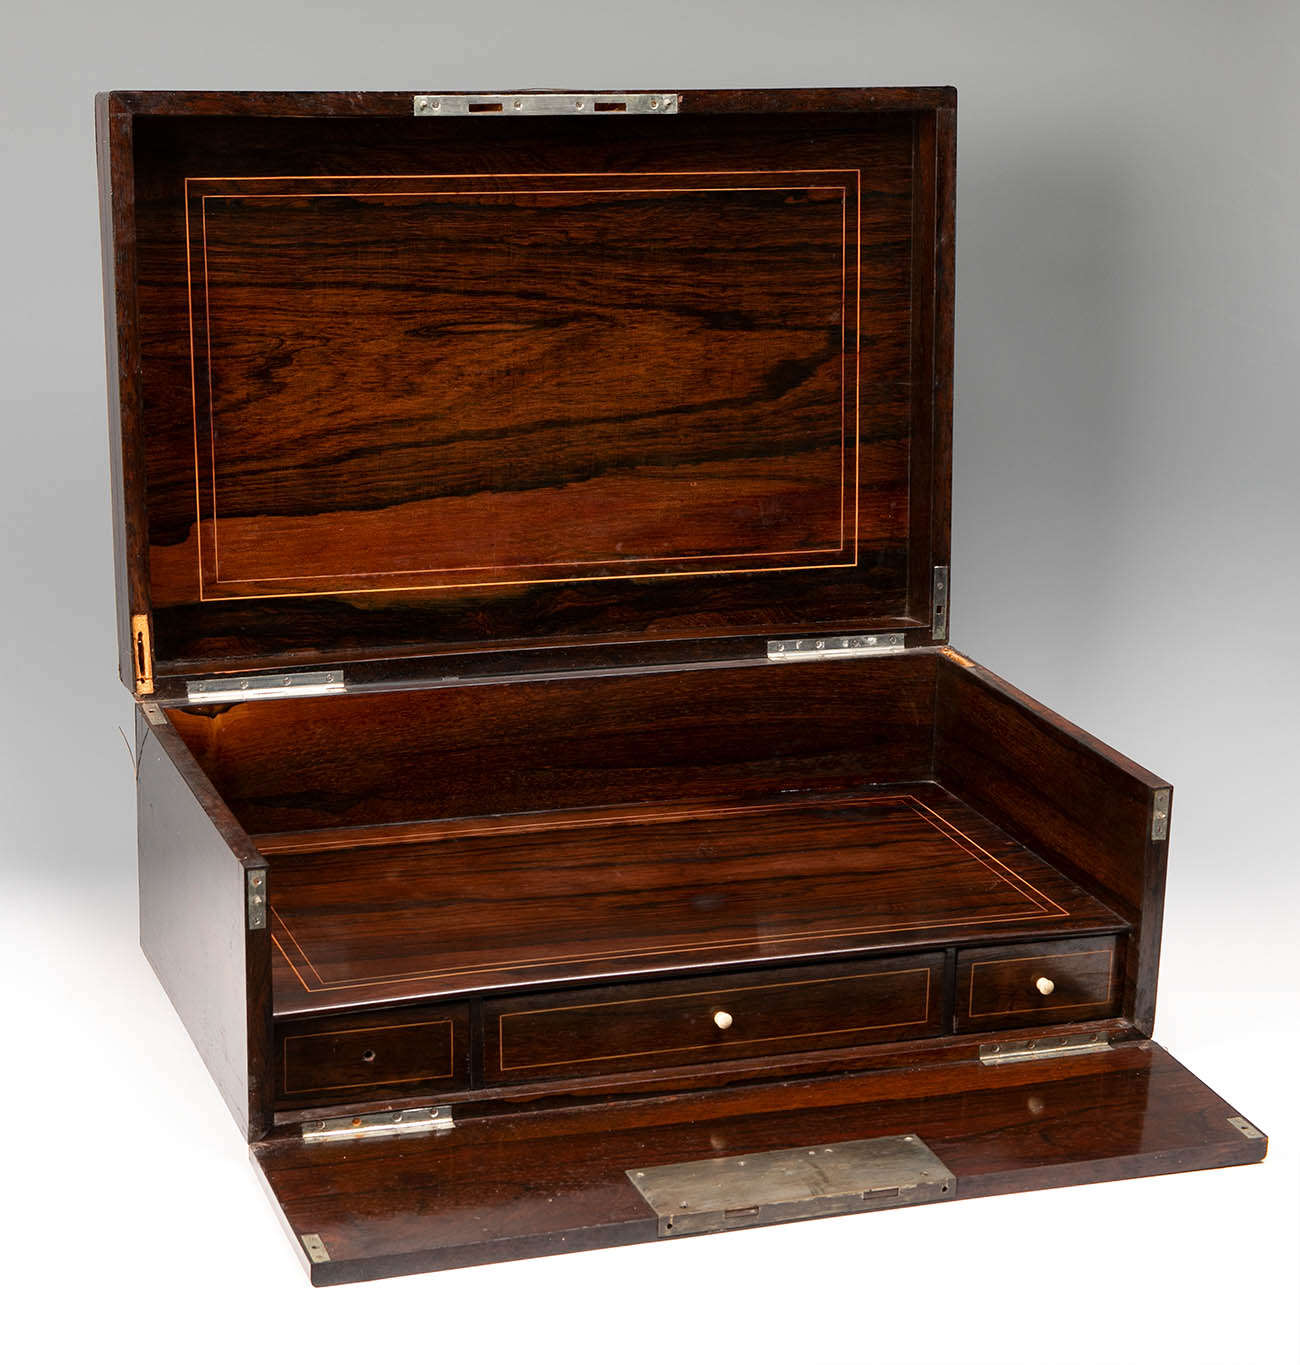 Portable writing-box. England, late 19th century.Rosewood frame with oriental-inspired decoration